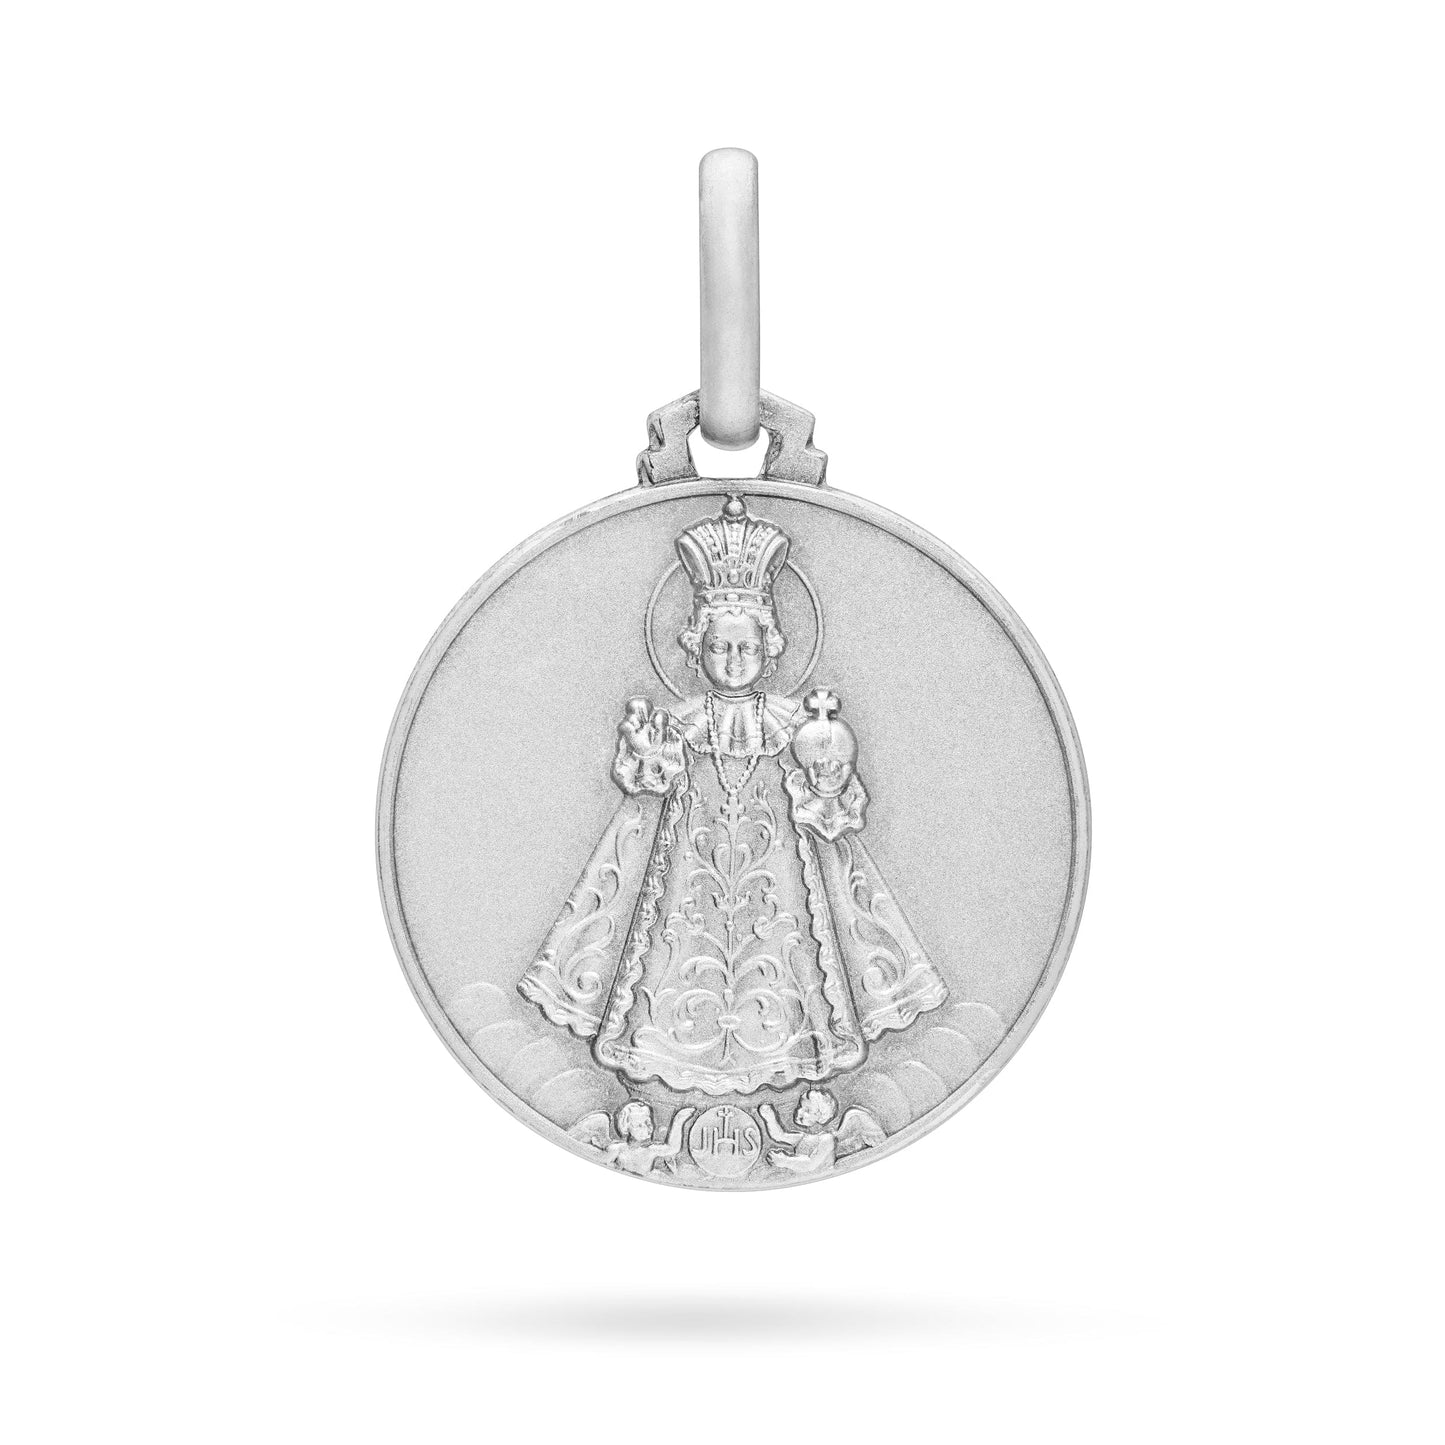 MONDO CATTOLICO Medal 10 mm (0.39 in) Silver medal of Child of Prague